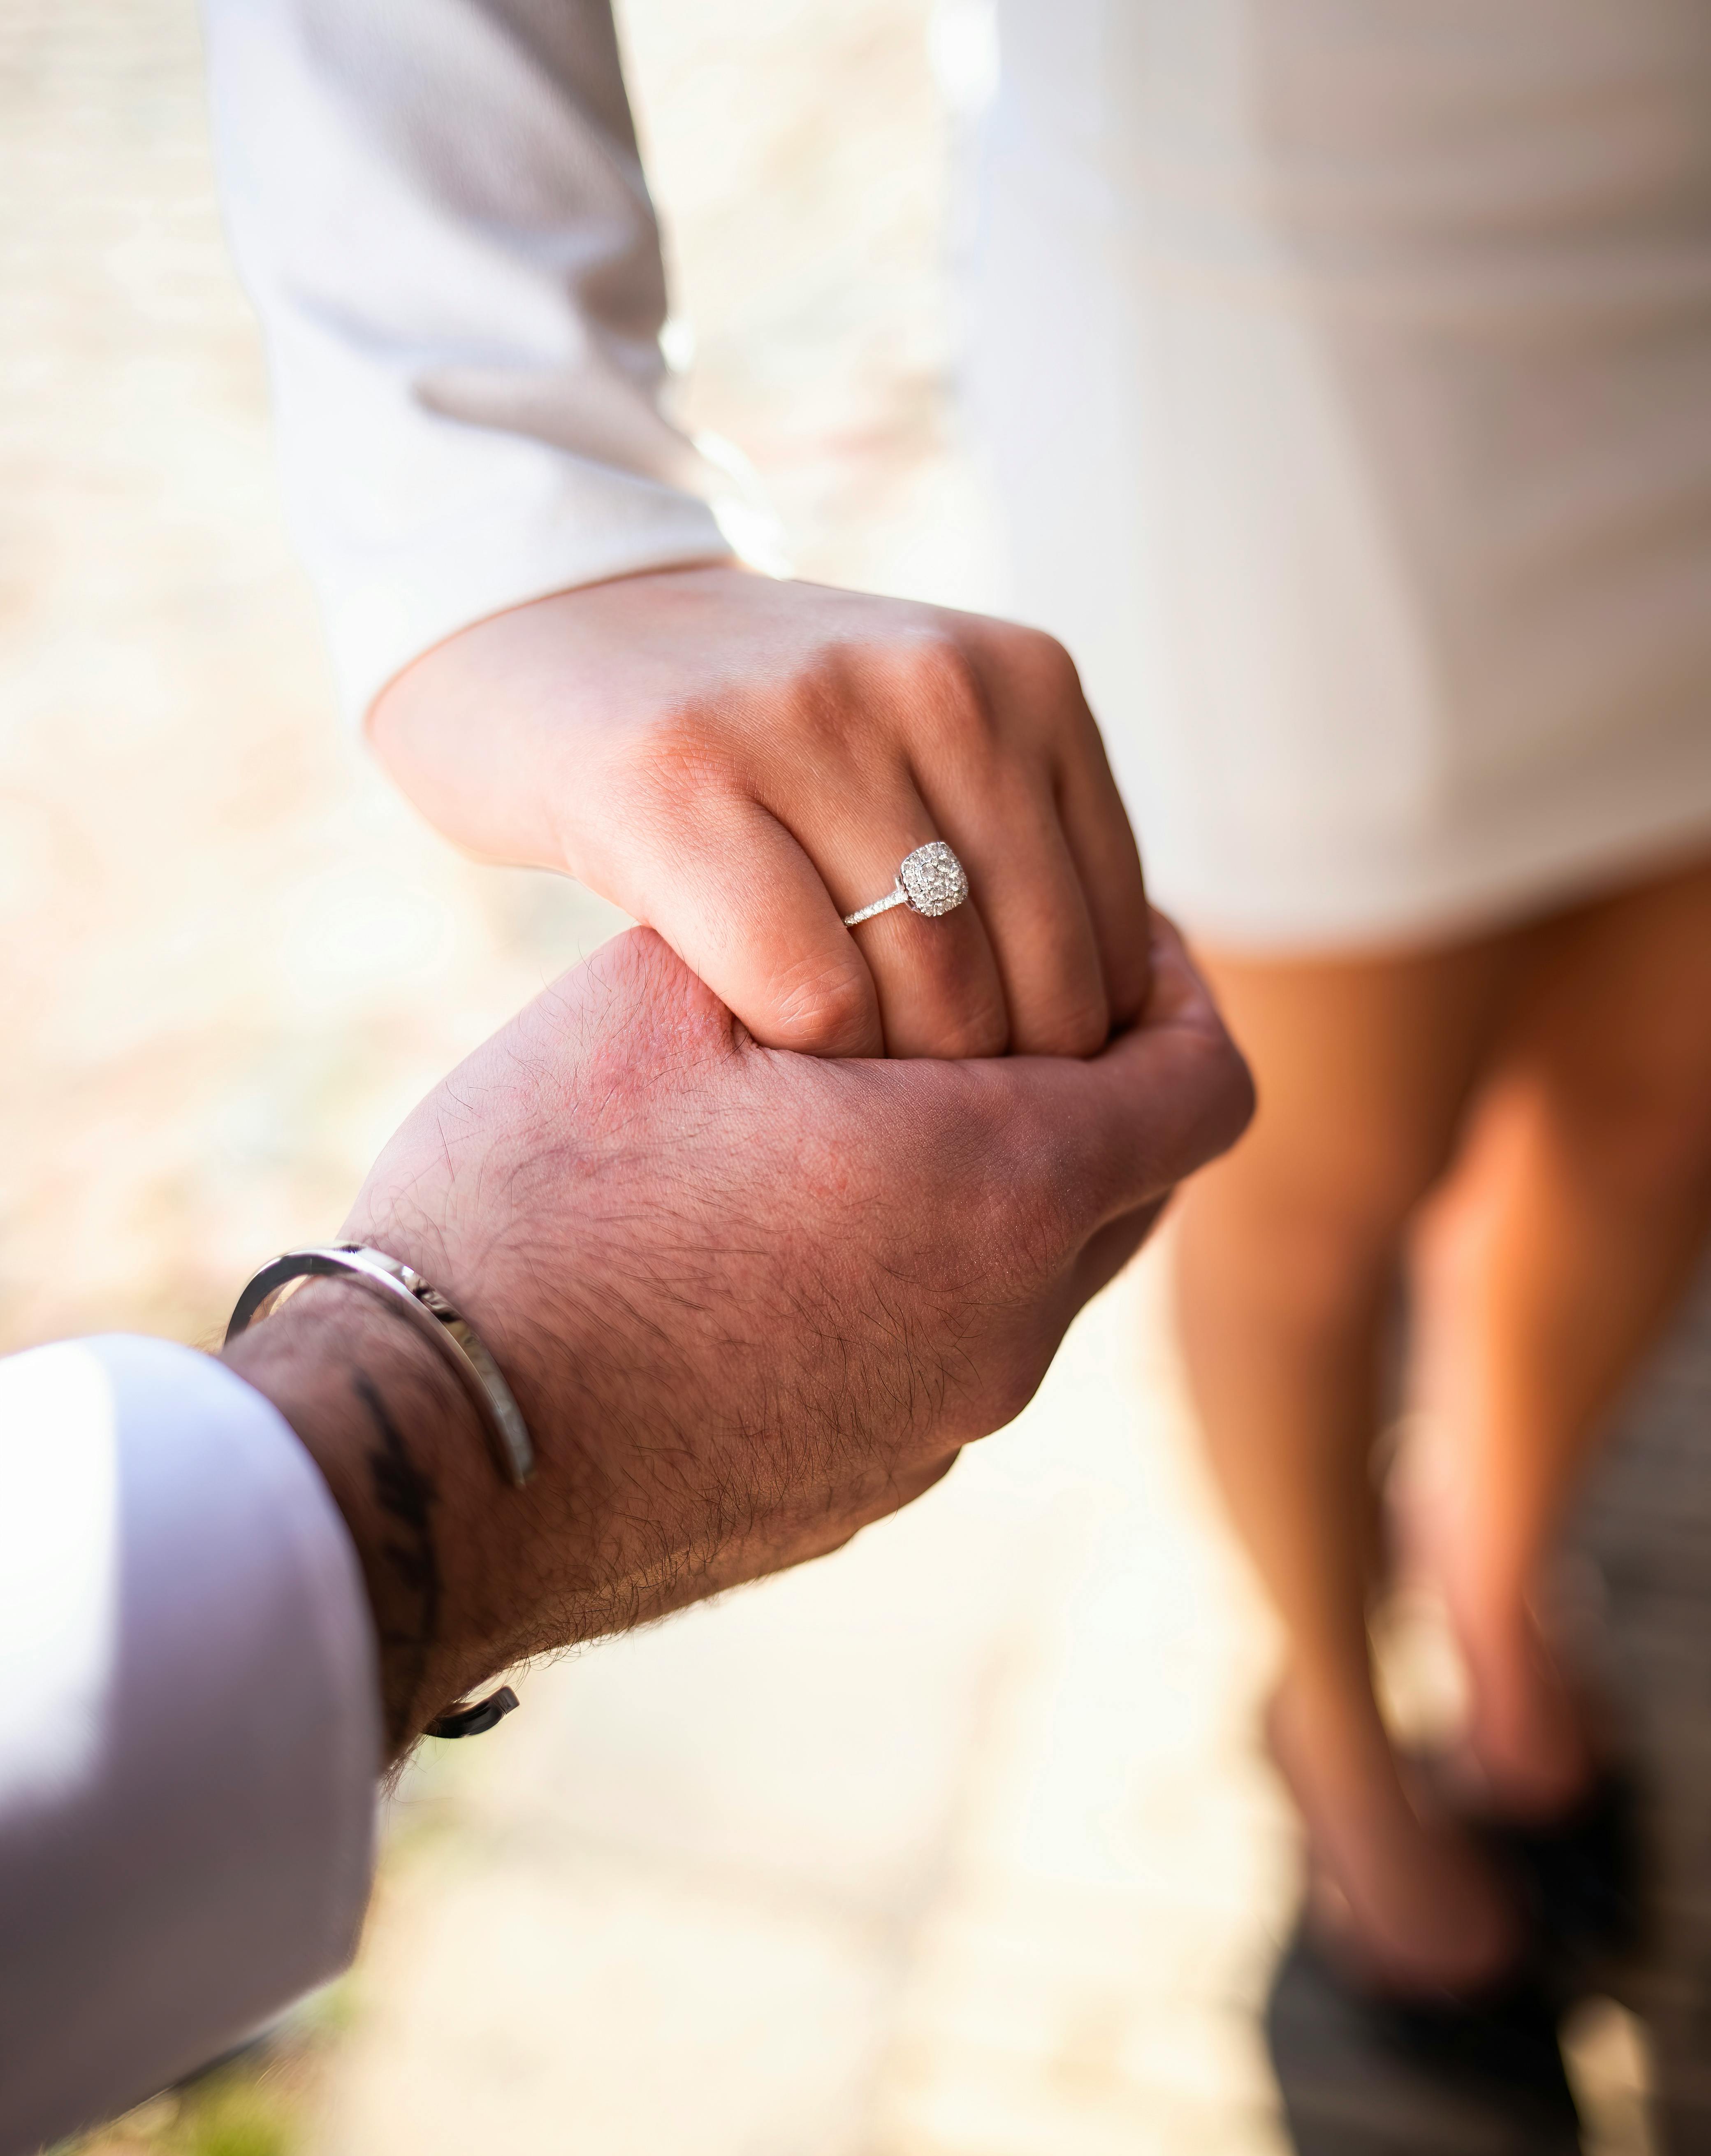 Couple holding hands and showing engagement ring · Free Stock Photo